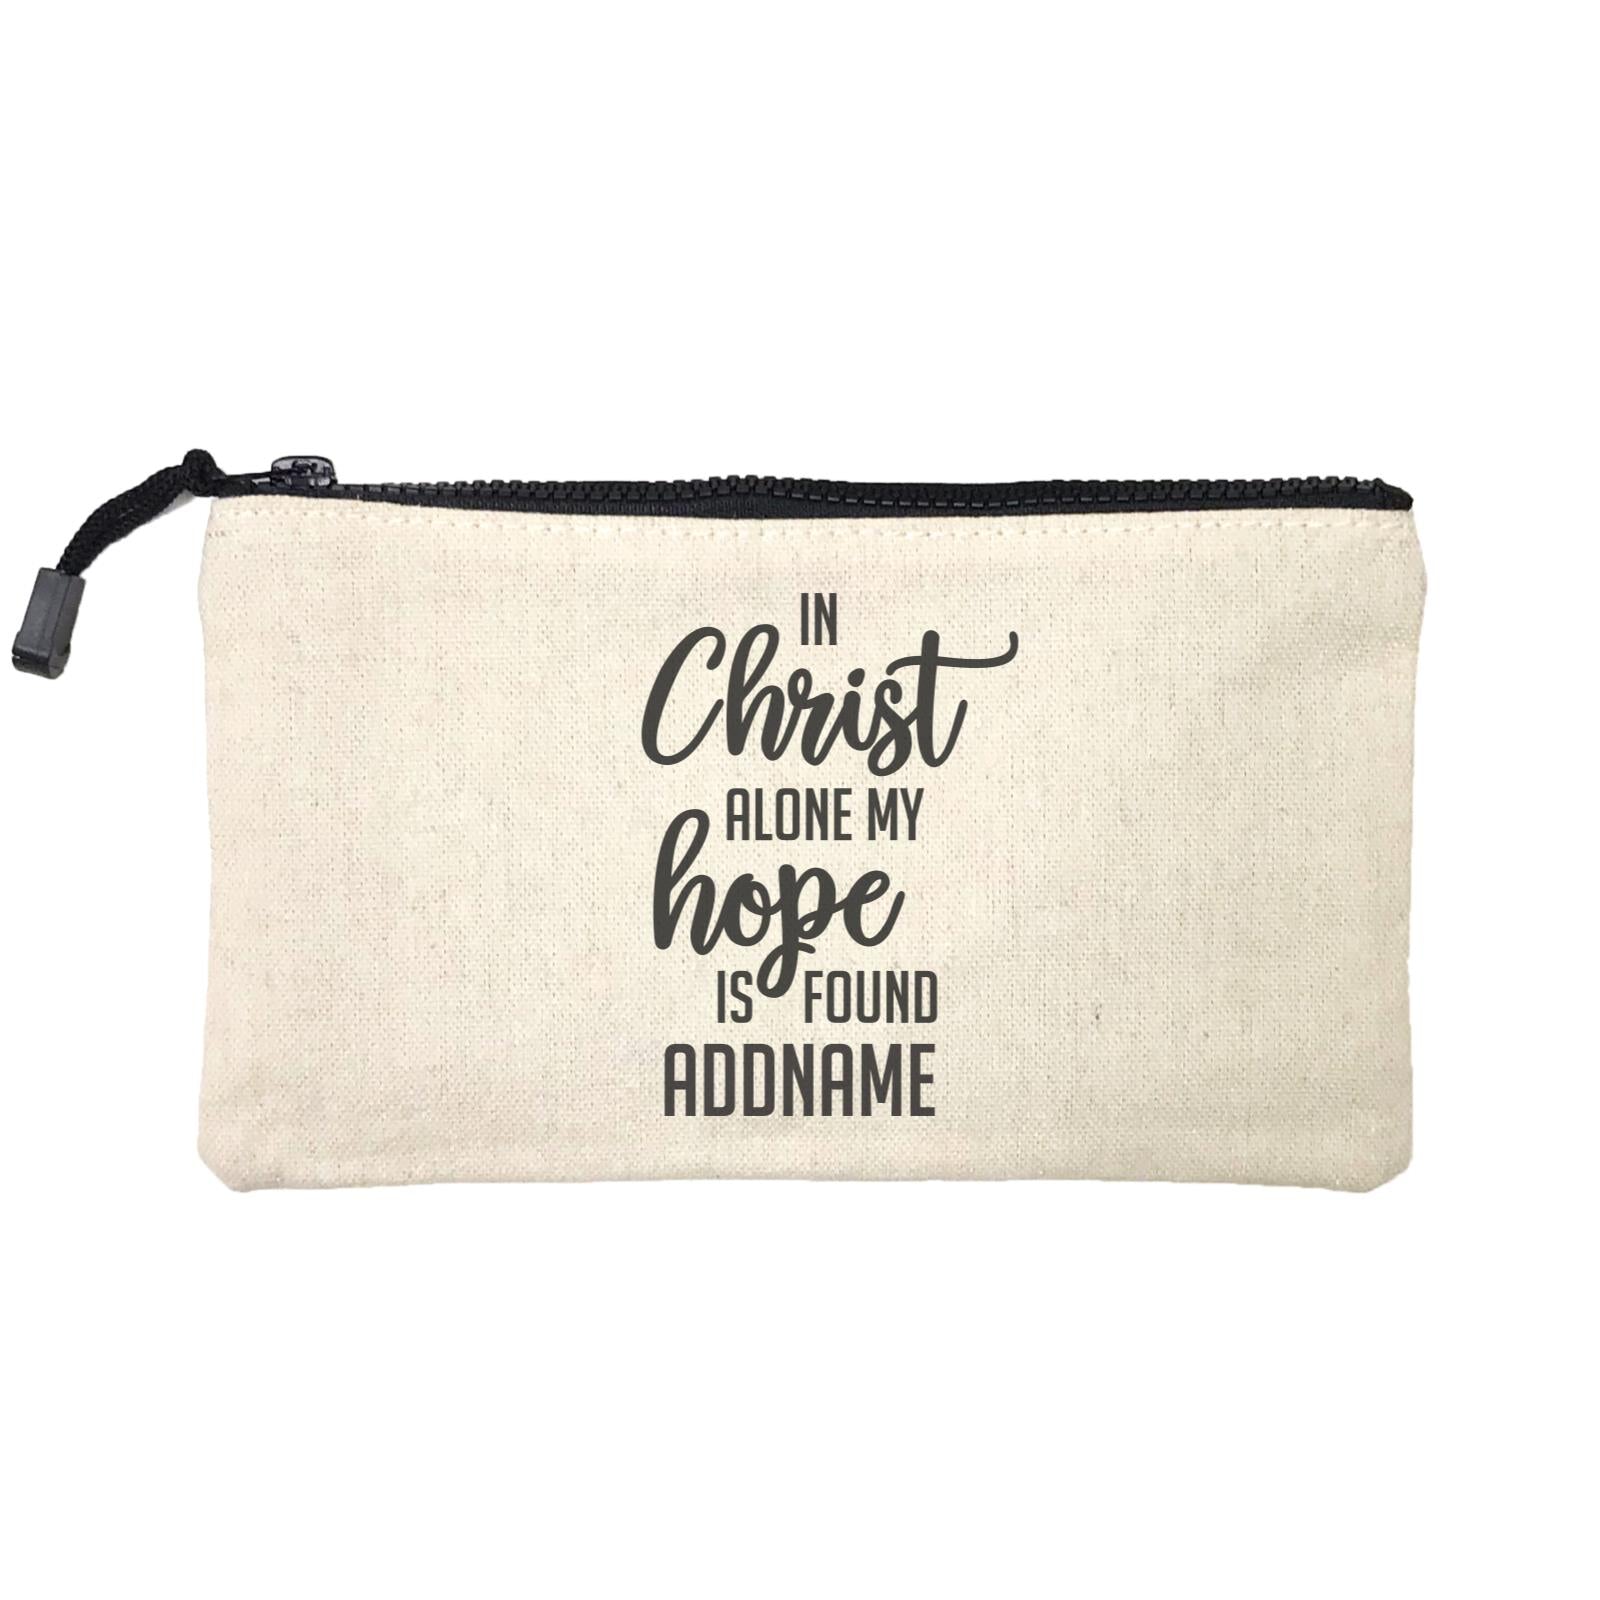 Christian Series In Christ Alone My Hope Is Found Addname Mini Accessories Stationery Pouch